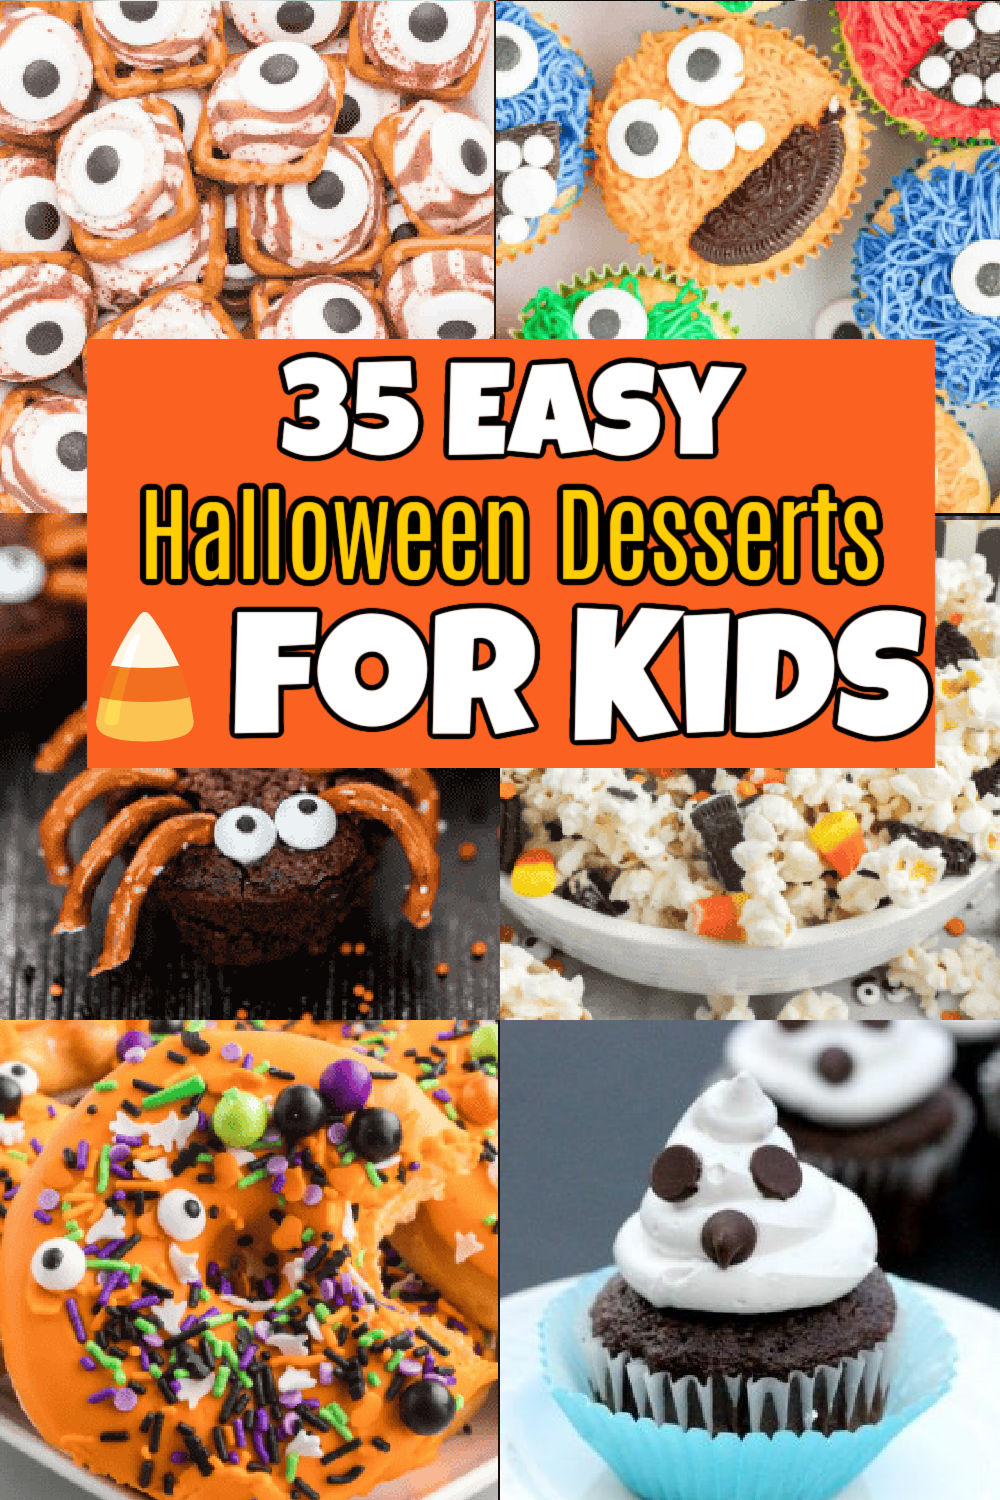 Learn how to make the cutest Halloween Desserts for Kids.  35 easy Halloween treats everyone will enjoy. These easy and tasty recipes are perfect for Halloween parties, class parties, movie night and more. #eatingonadime #halloweendessertsforkids #nobakedesserts #easyhalloweendesserts 